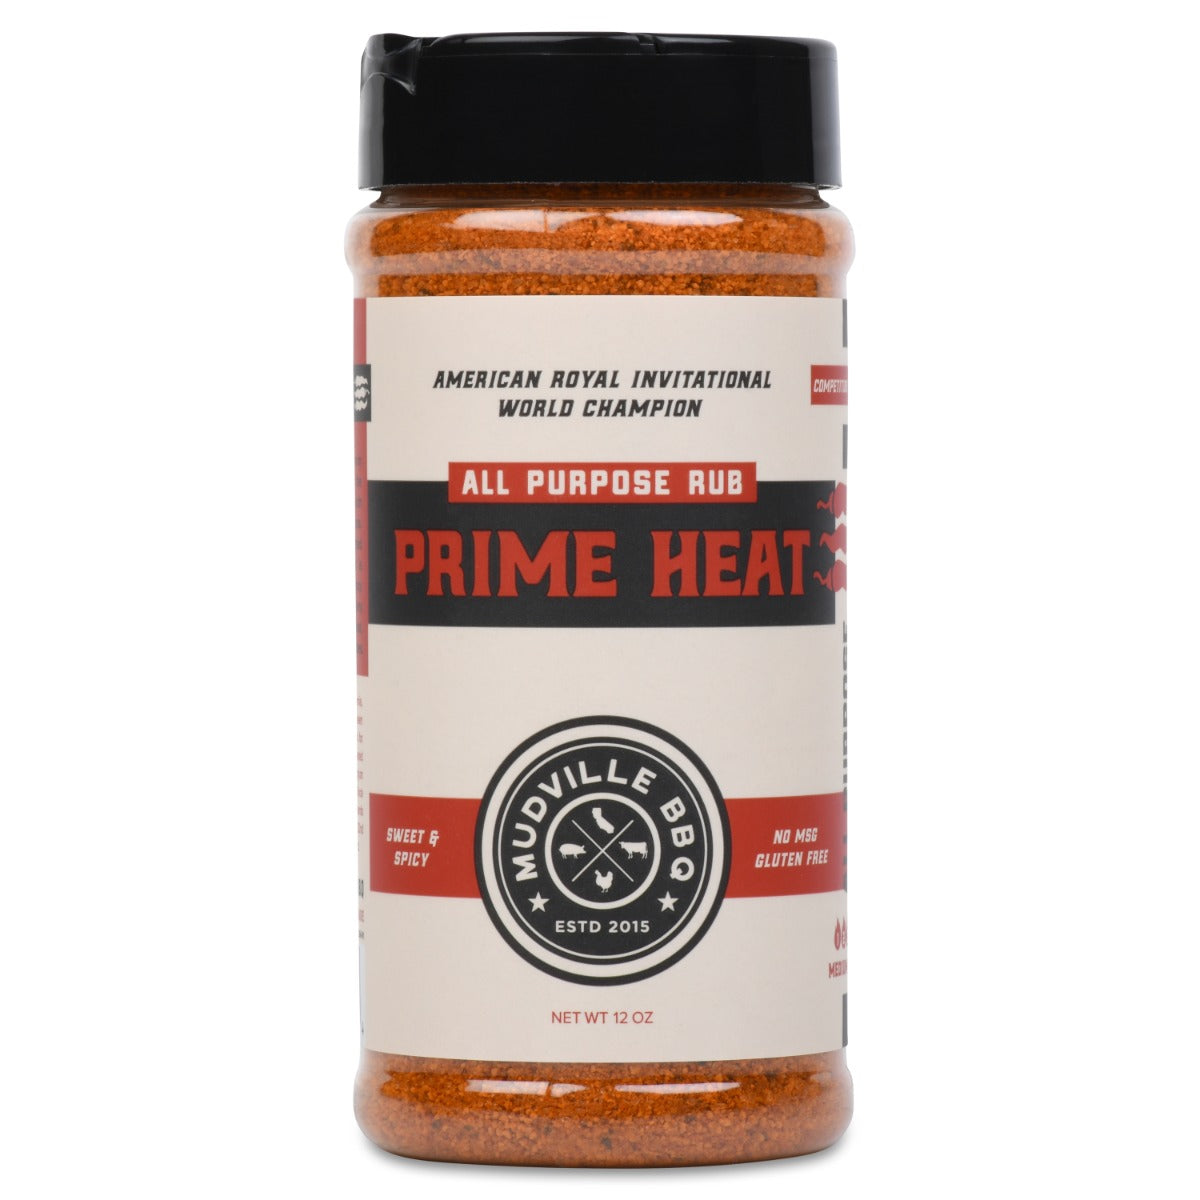 Front view of a bottle of Mudville BBQ Prime Heat All Purpose Rub. The label highlights the rub as an American Royal Invitational World Champion, promoting its sweet and spicy flavor. The bottle contains 12 oz of rub, and the label states it is free from MSG and gluten.